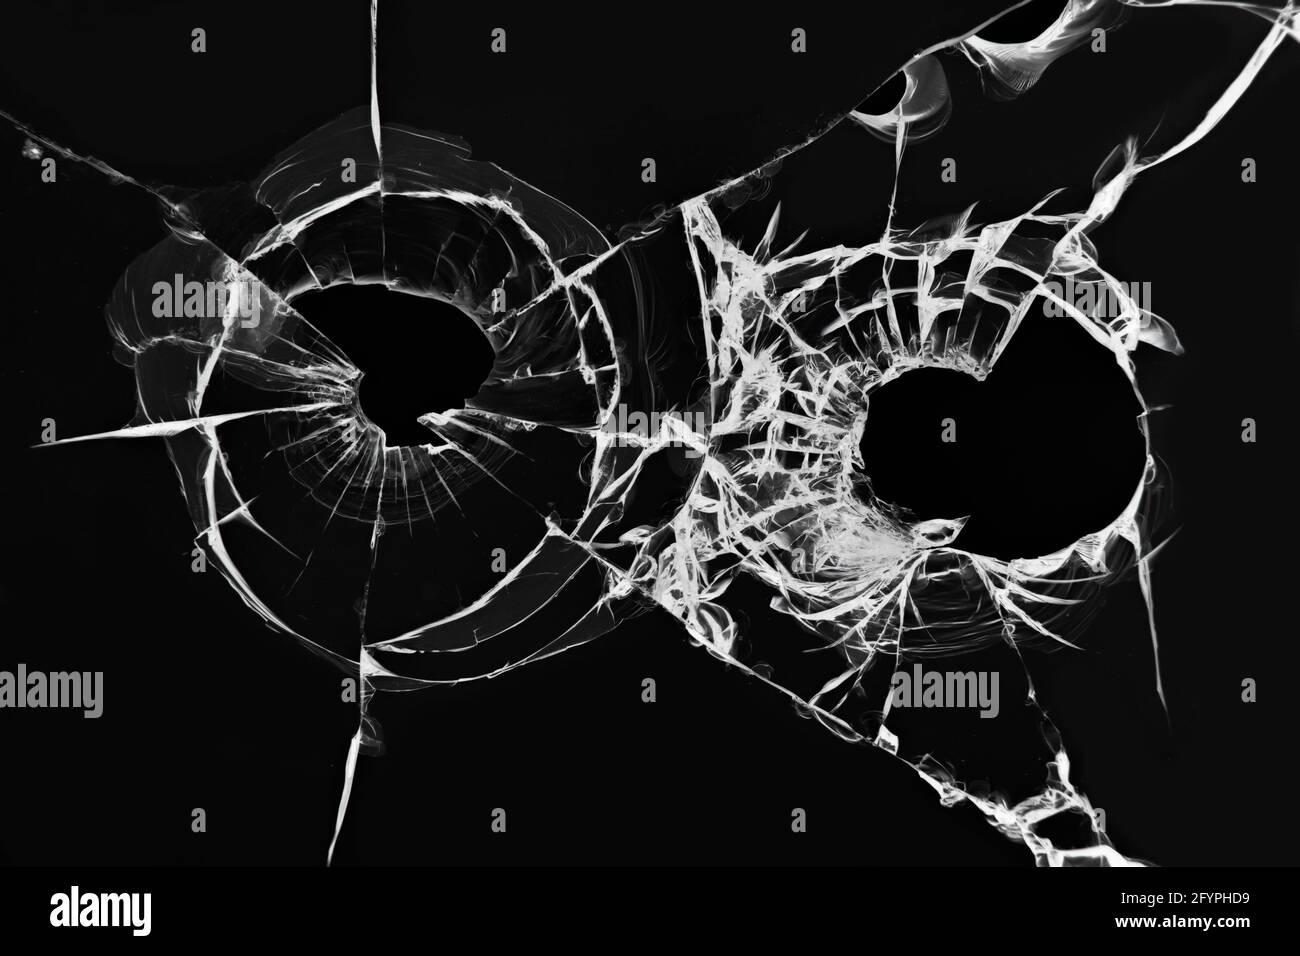 The effect of broken glass from a shot. Illustration of holes from pistol bullets in the windshield of a car on a black background Stock Photo